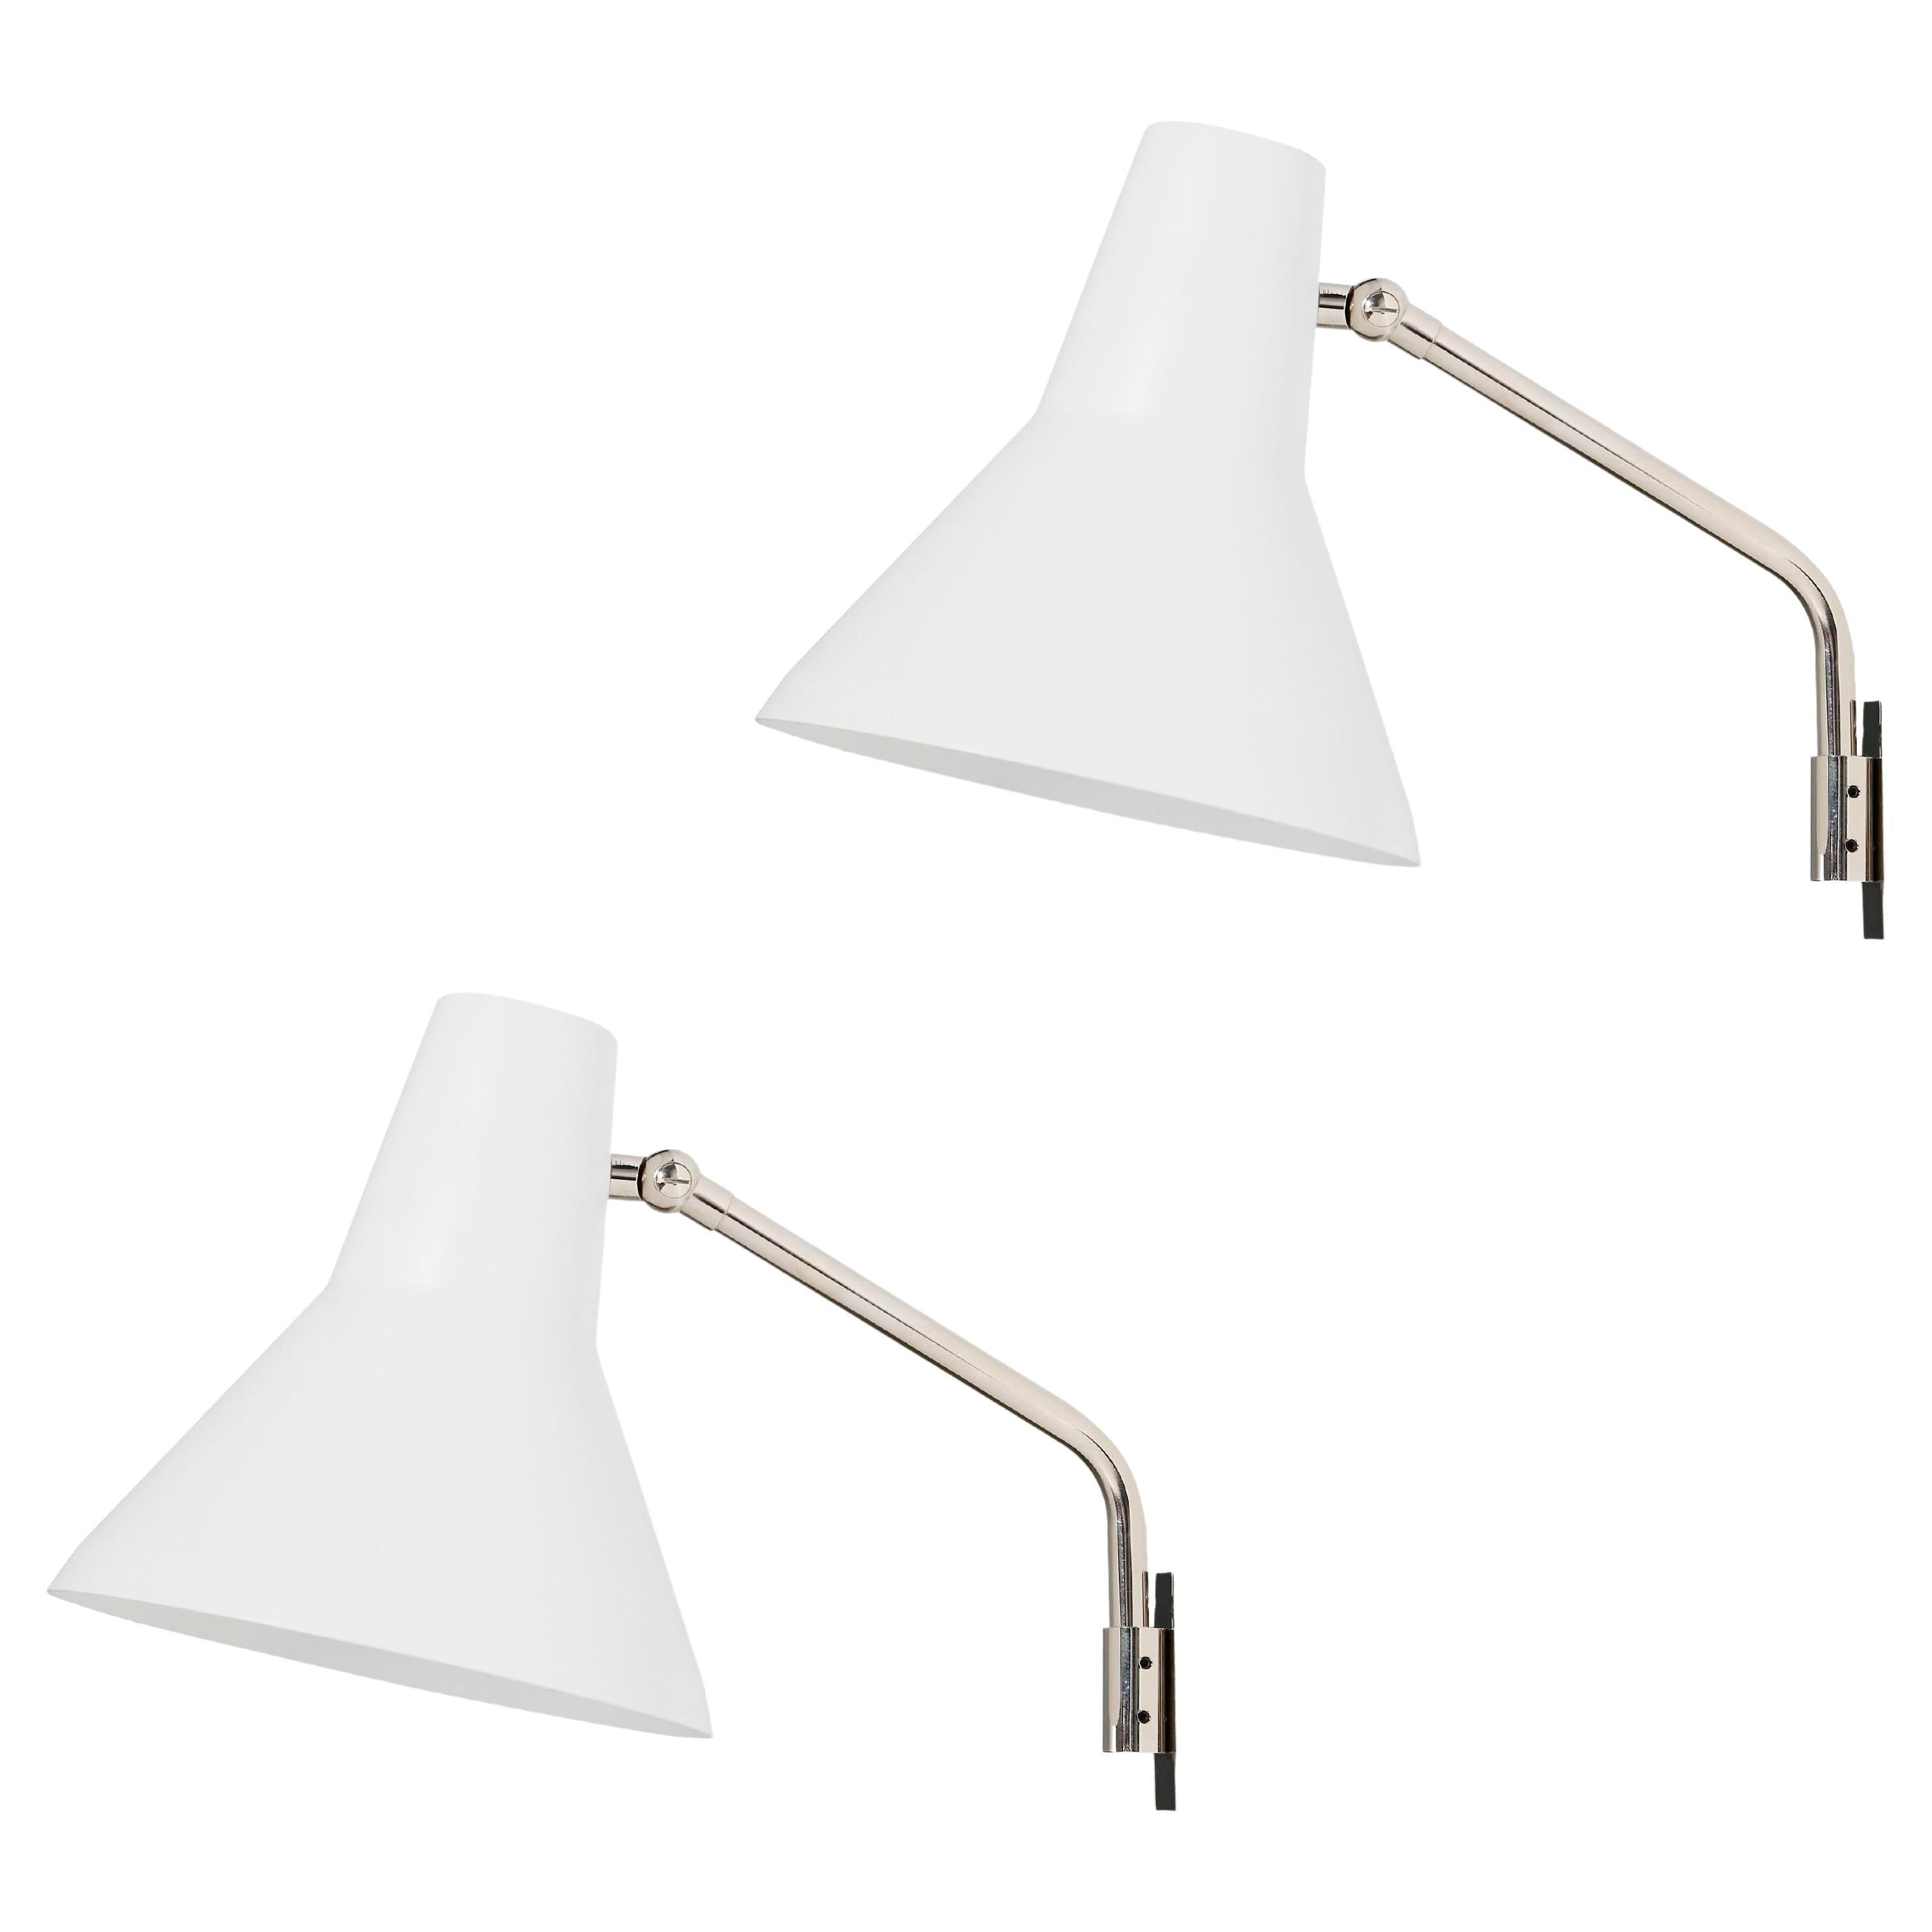 Pair of Lisa Johansson-Pape 'Carin' Wall Lamps in Polished Chrome for Innolux For Sale